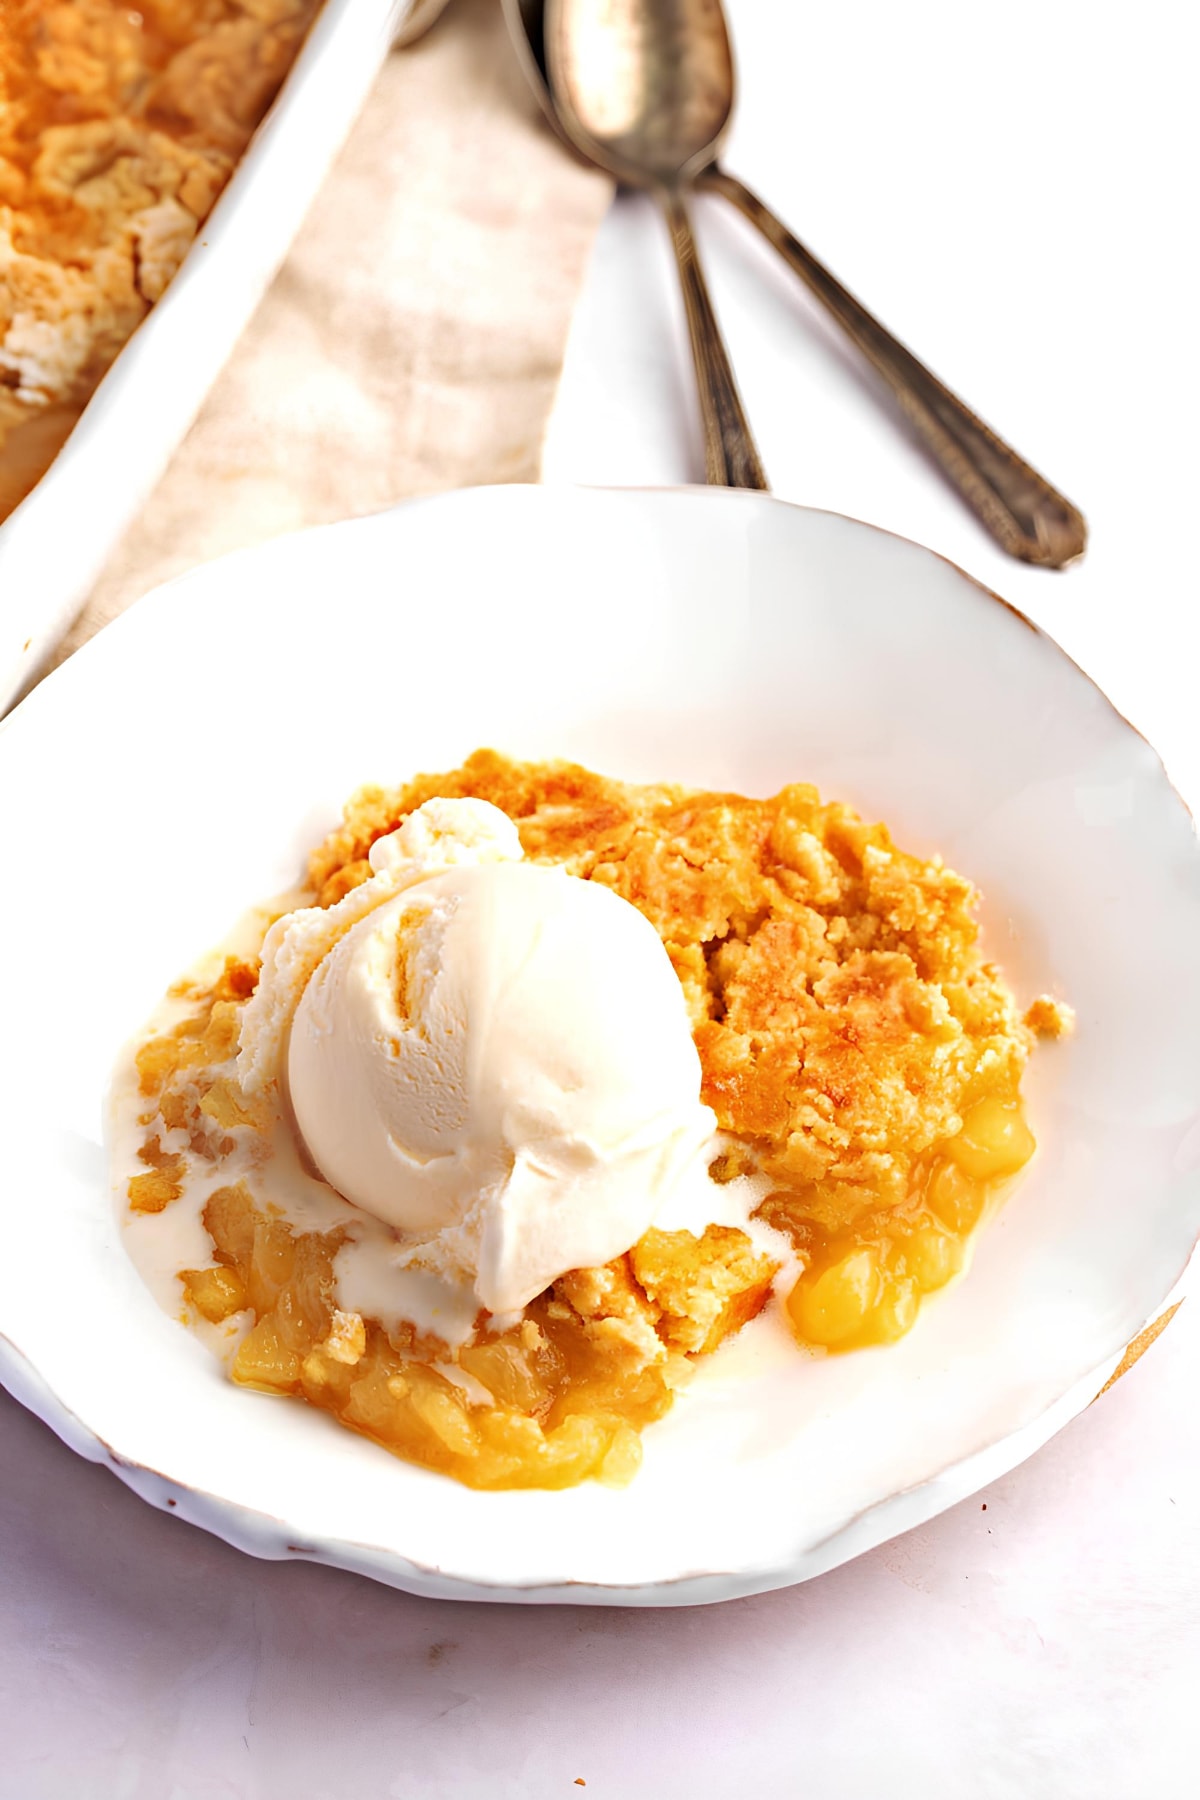 A Piece of Pineapple Dump Cake with Ice Cream on a Plate